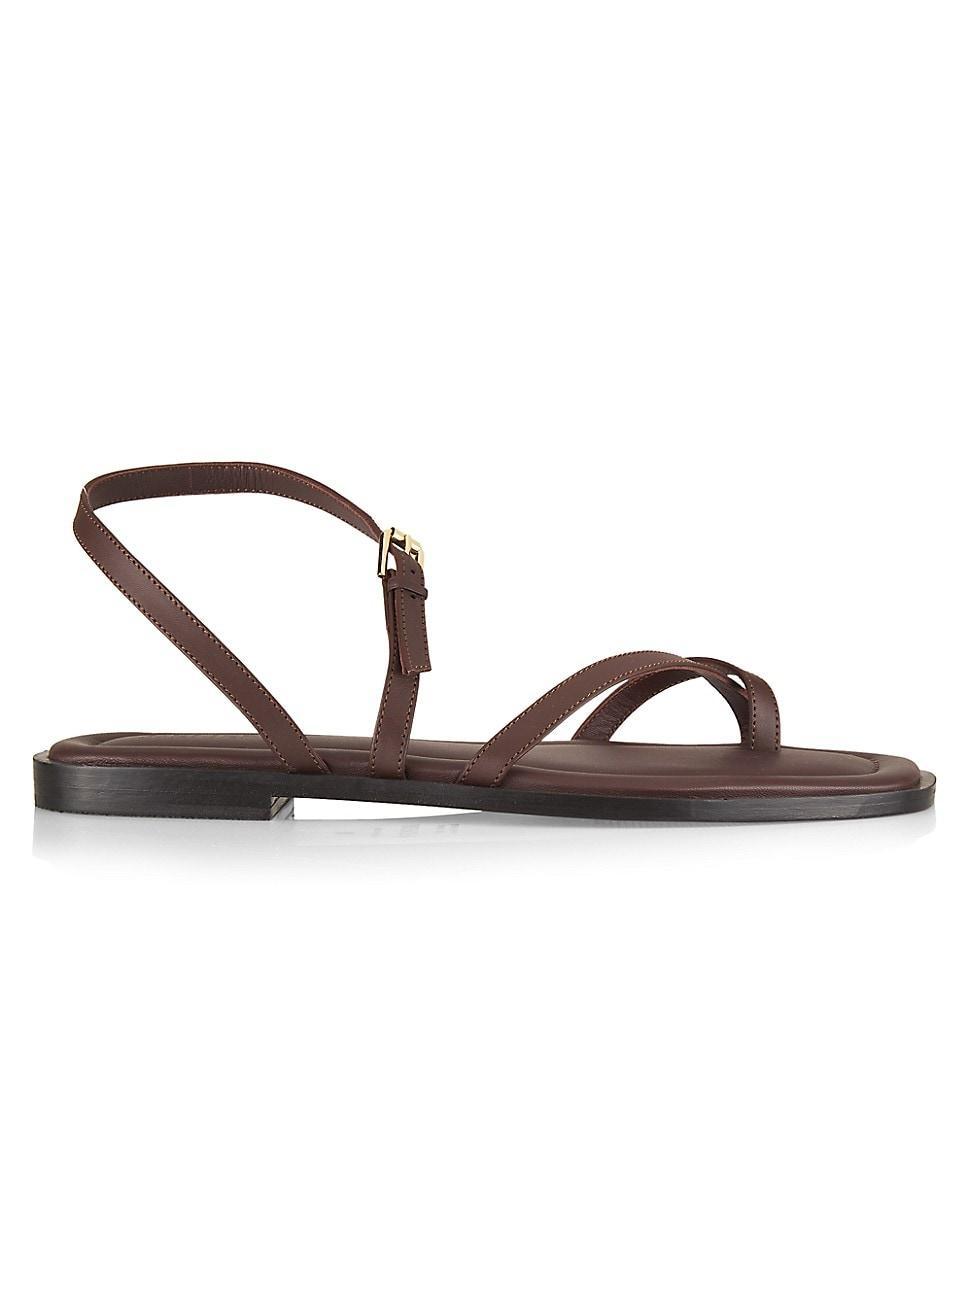 Womens Lucia Leather Sandals Product Image